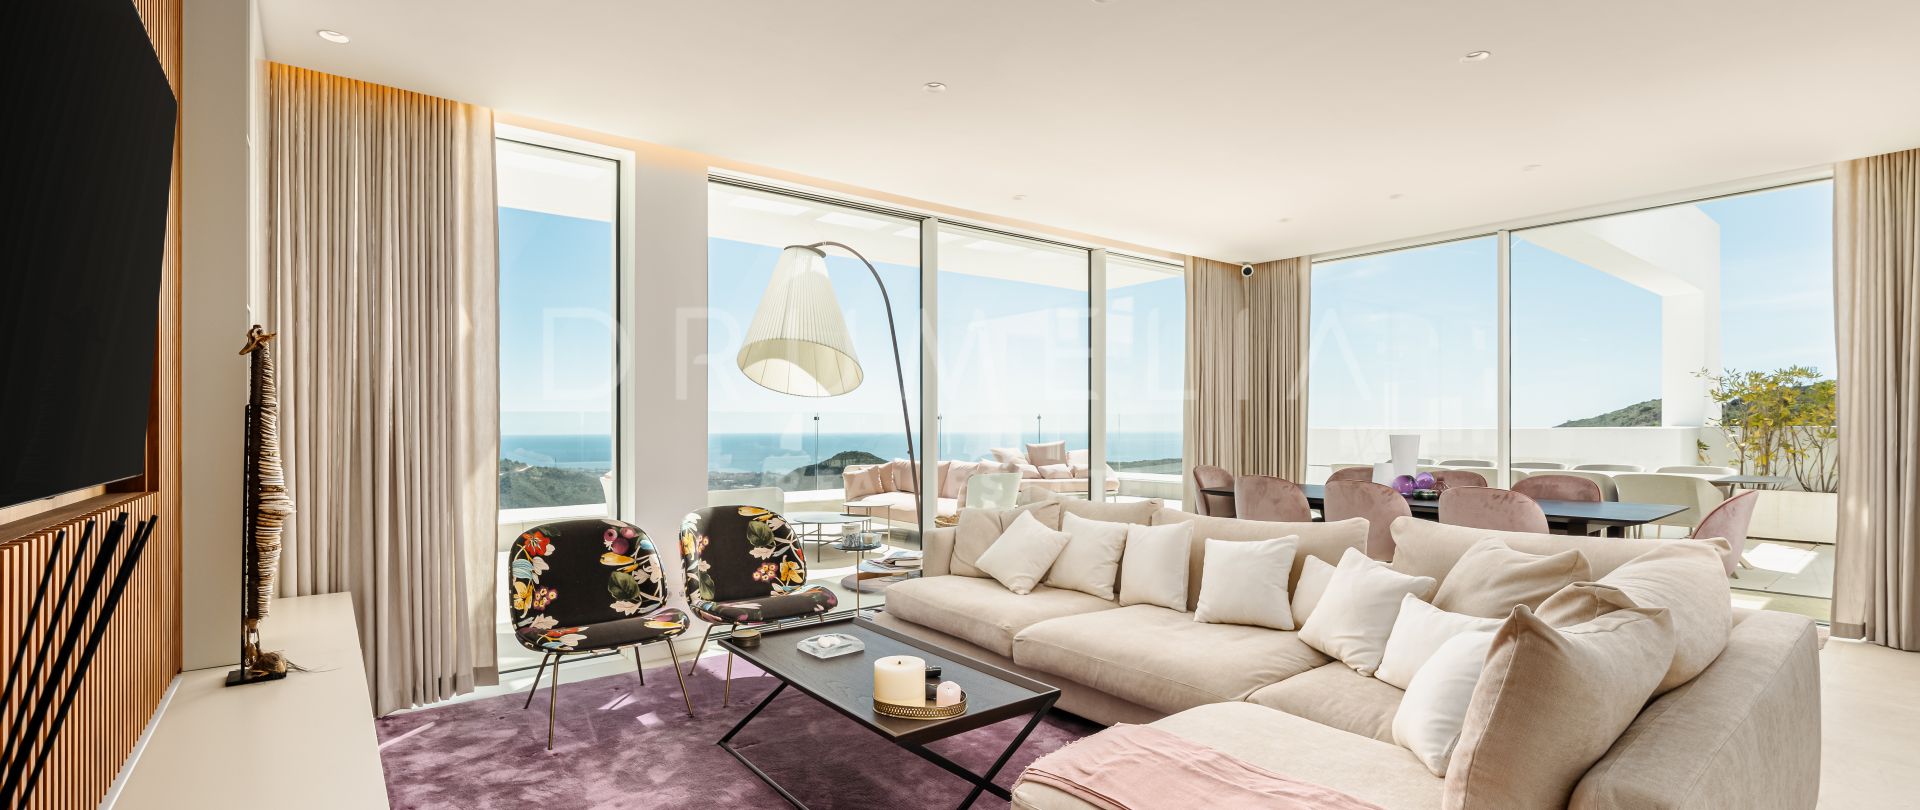 New stunning luxury duplex penthouse with spectacular views and amenities, Palo Alto, Ojen-Marbella